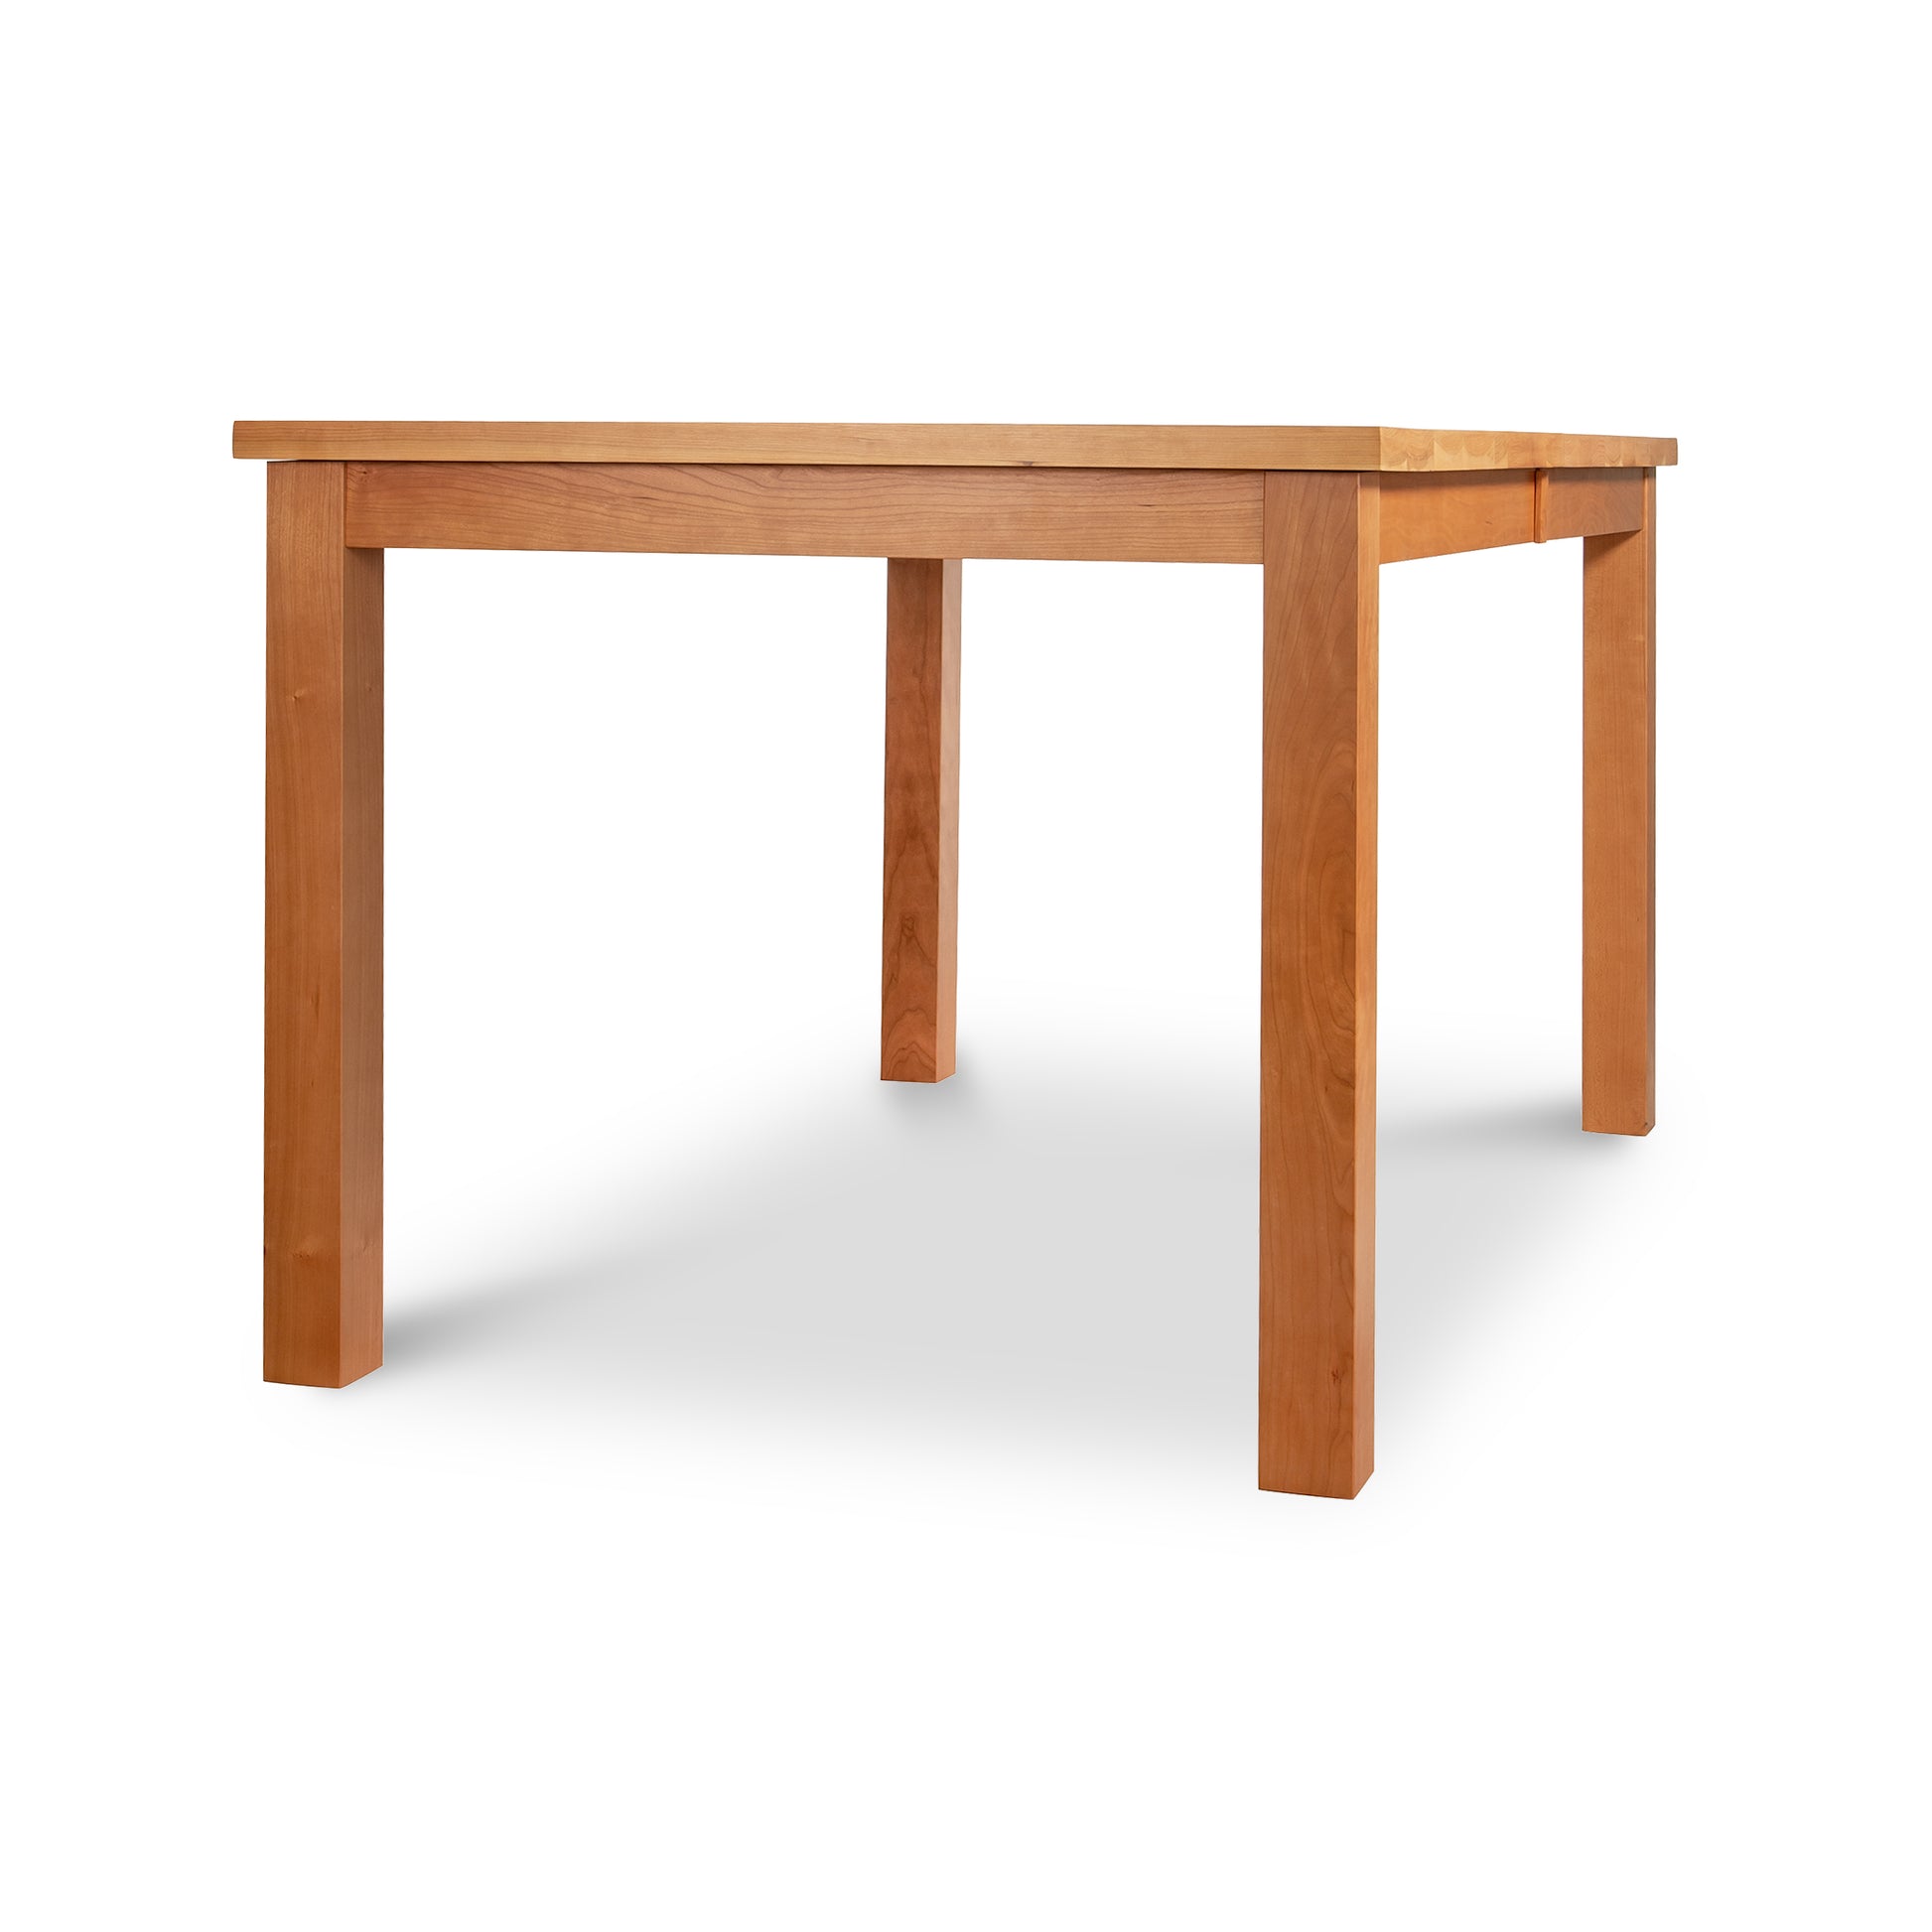 An eco-friendly, Lyndon Furniture Modern Mission Parsons Extension Table crafted from sustainably harvested woods on a white background.